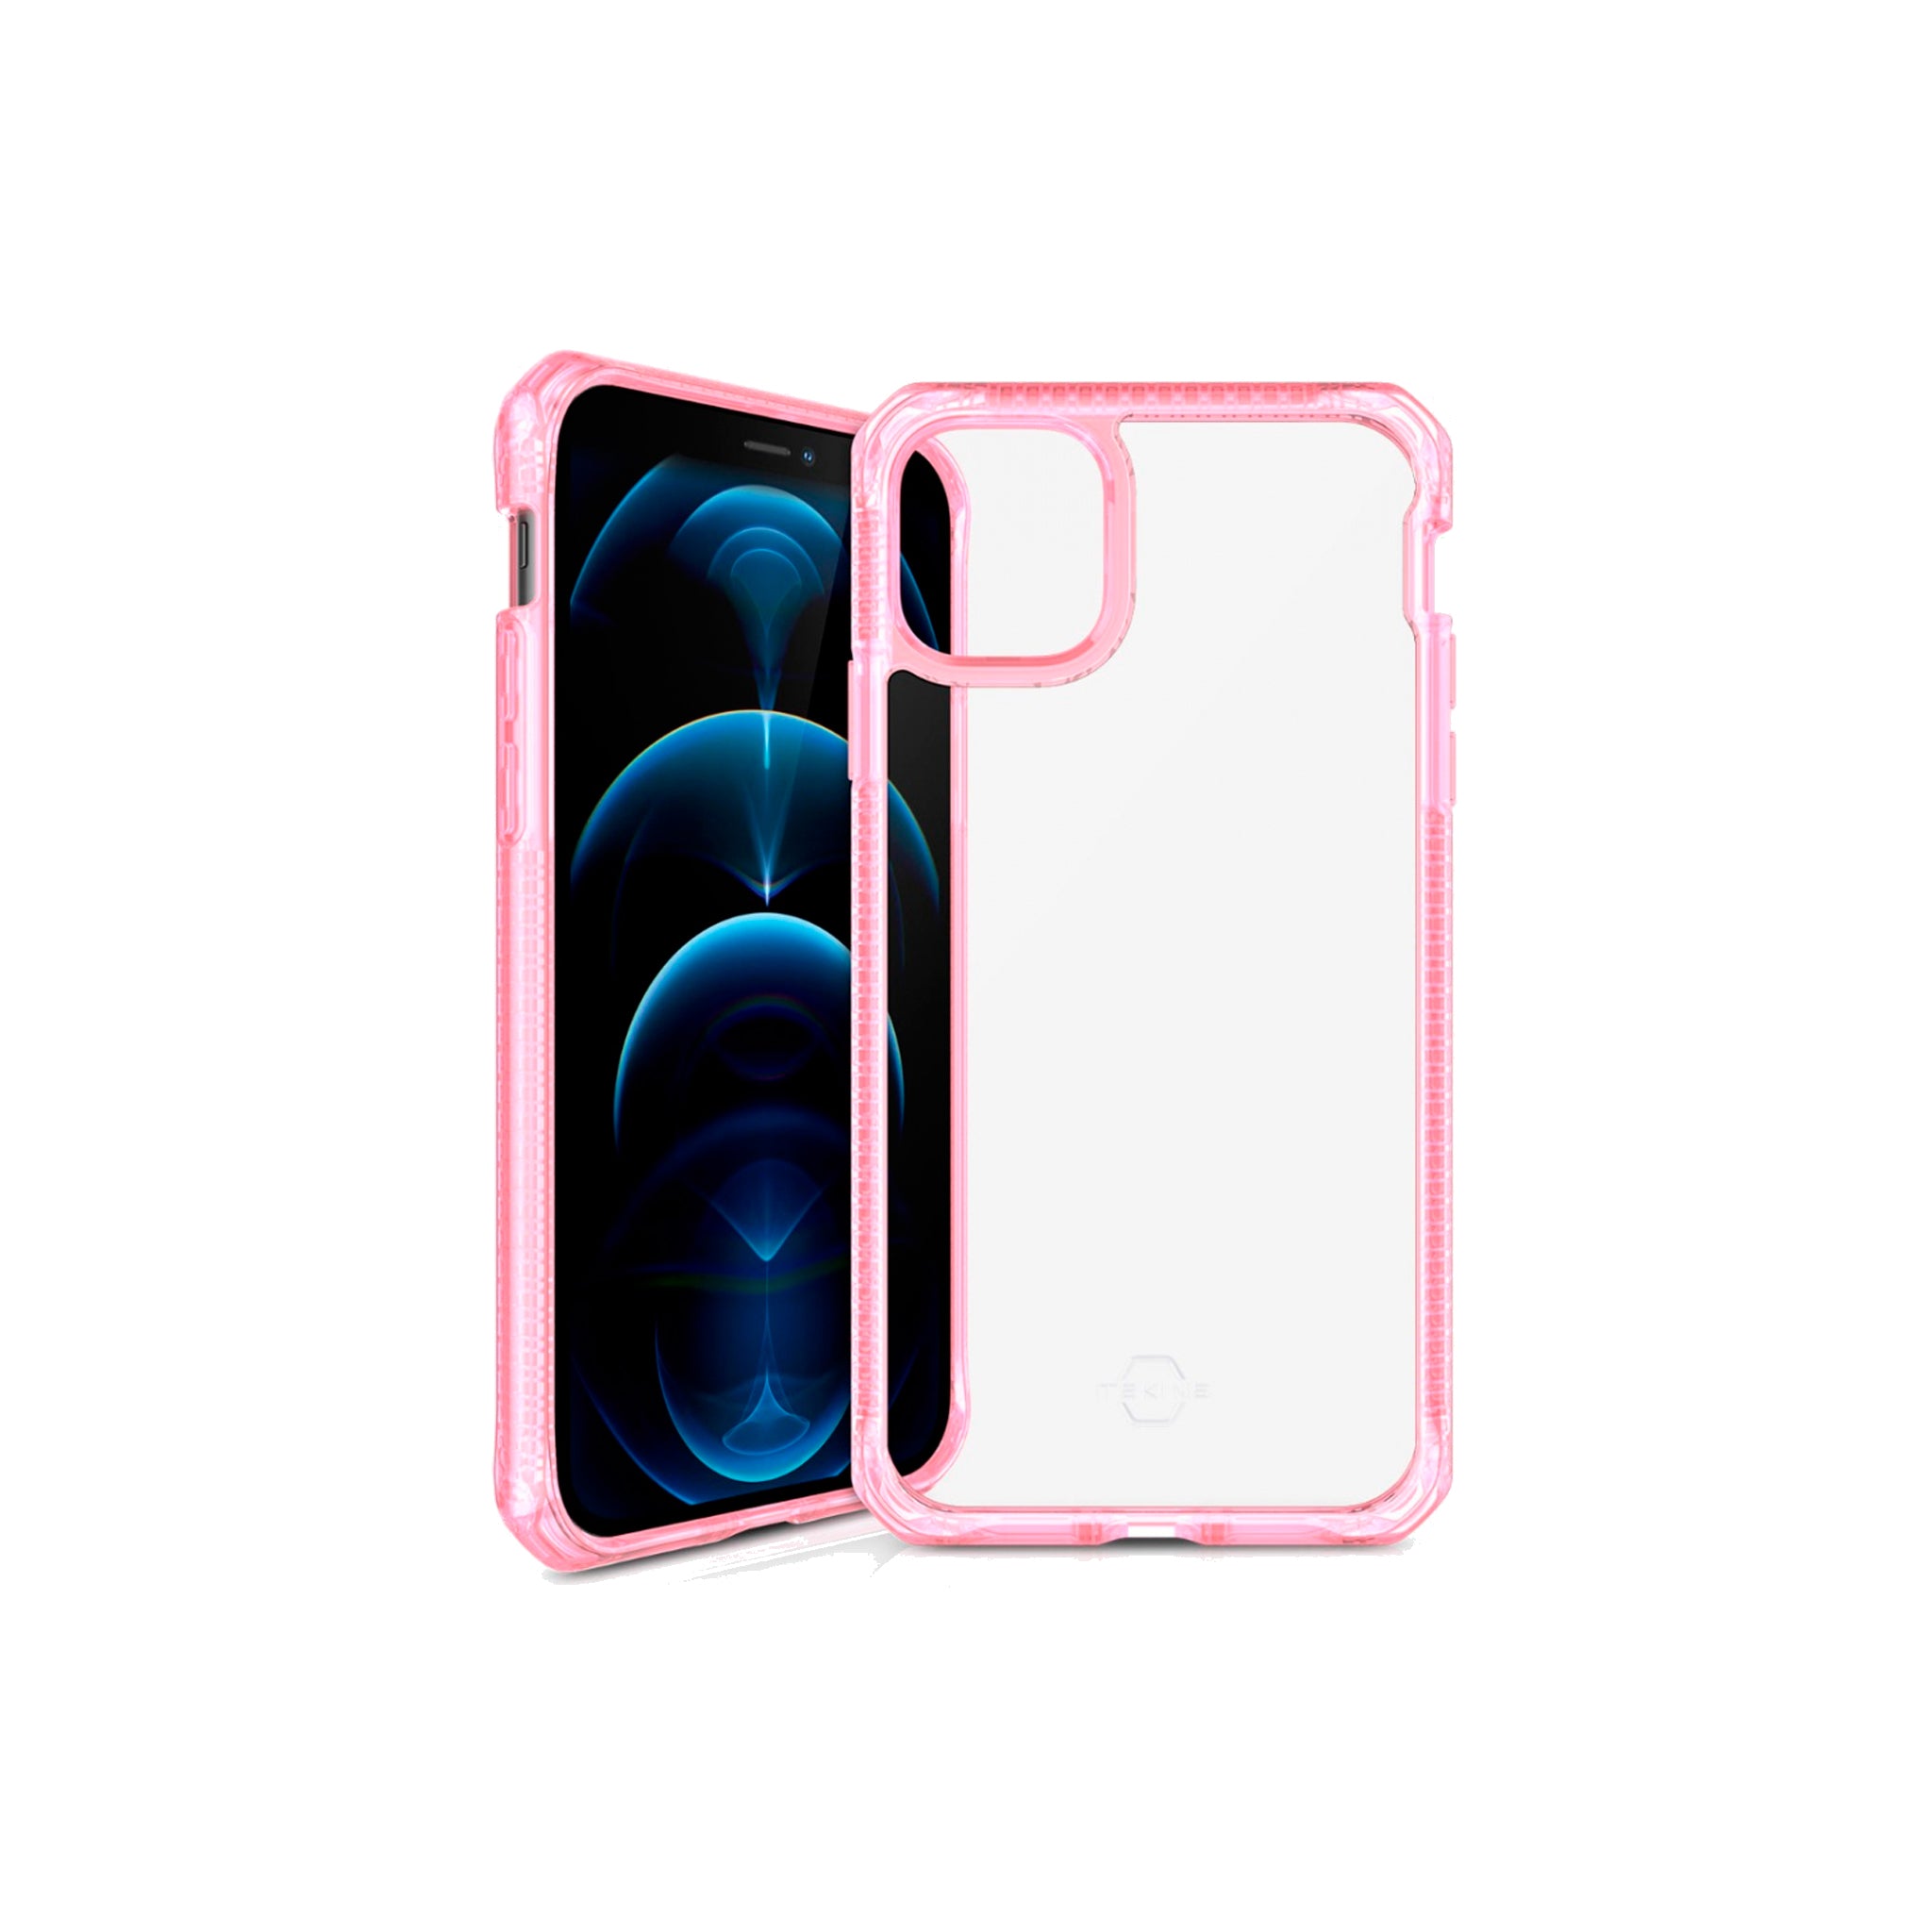 Itskins - Hybrid Clear Case For Apple Iphone 12 Pro Max - Light Pink And Transparent